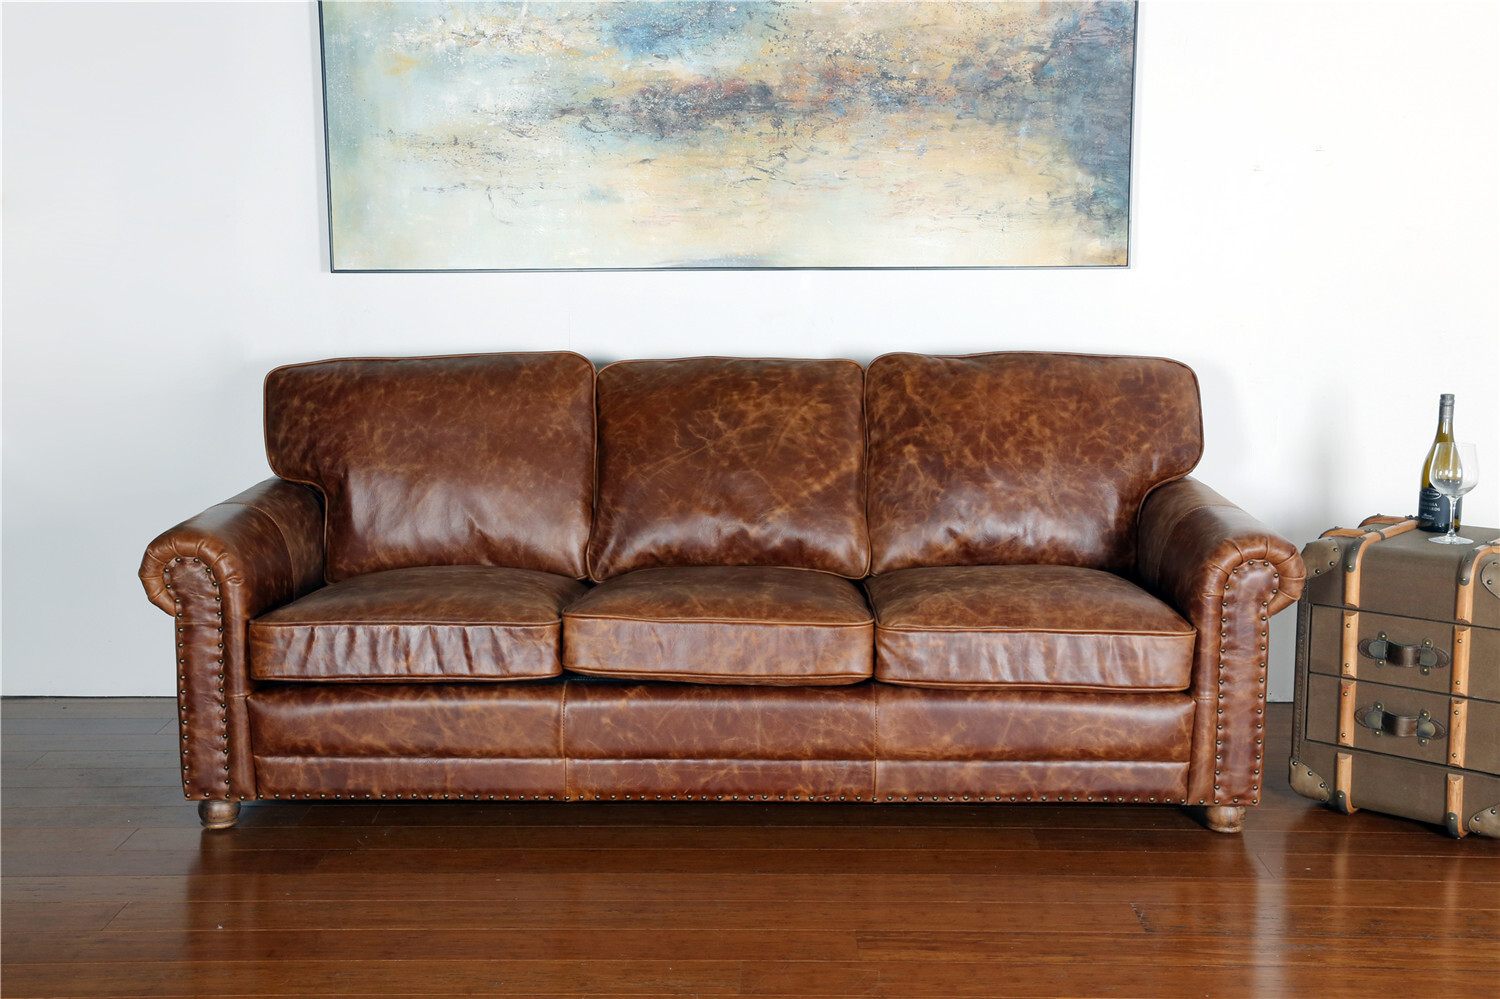 Hudson Antique Leather Lounge Range, Antique Leather Couch